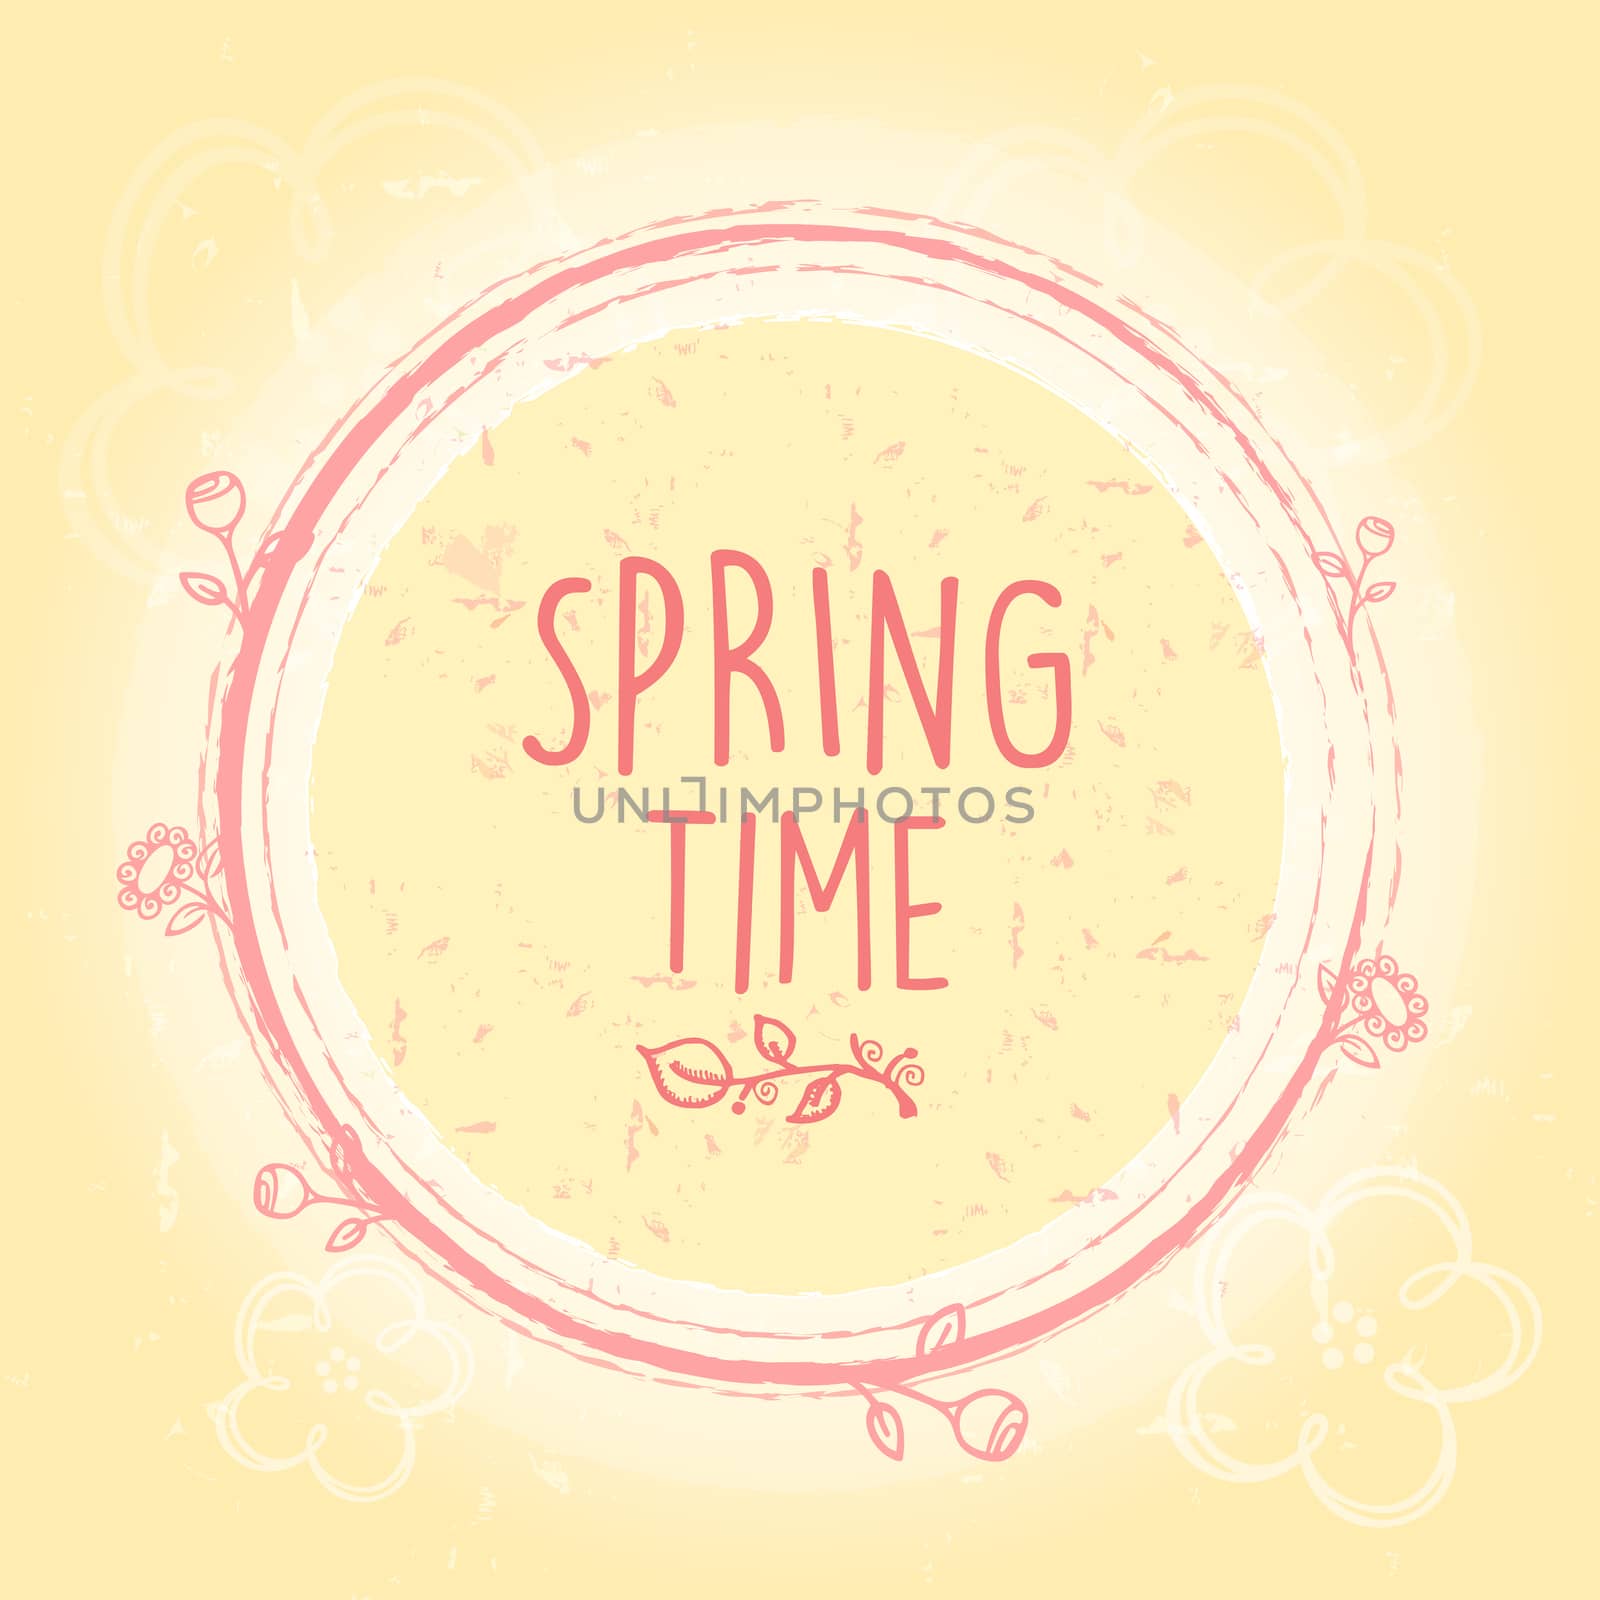 spring time in circle with flowers, old paper background by marinini